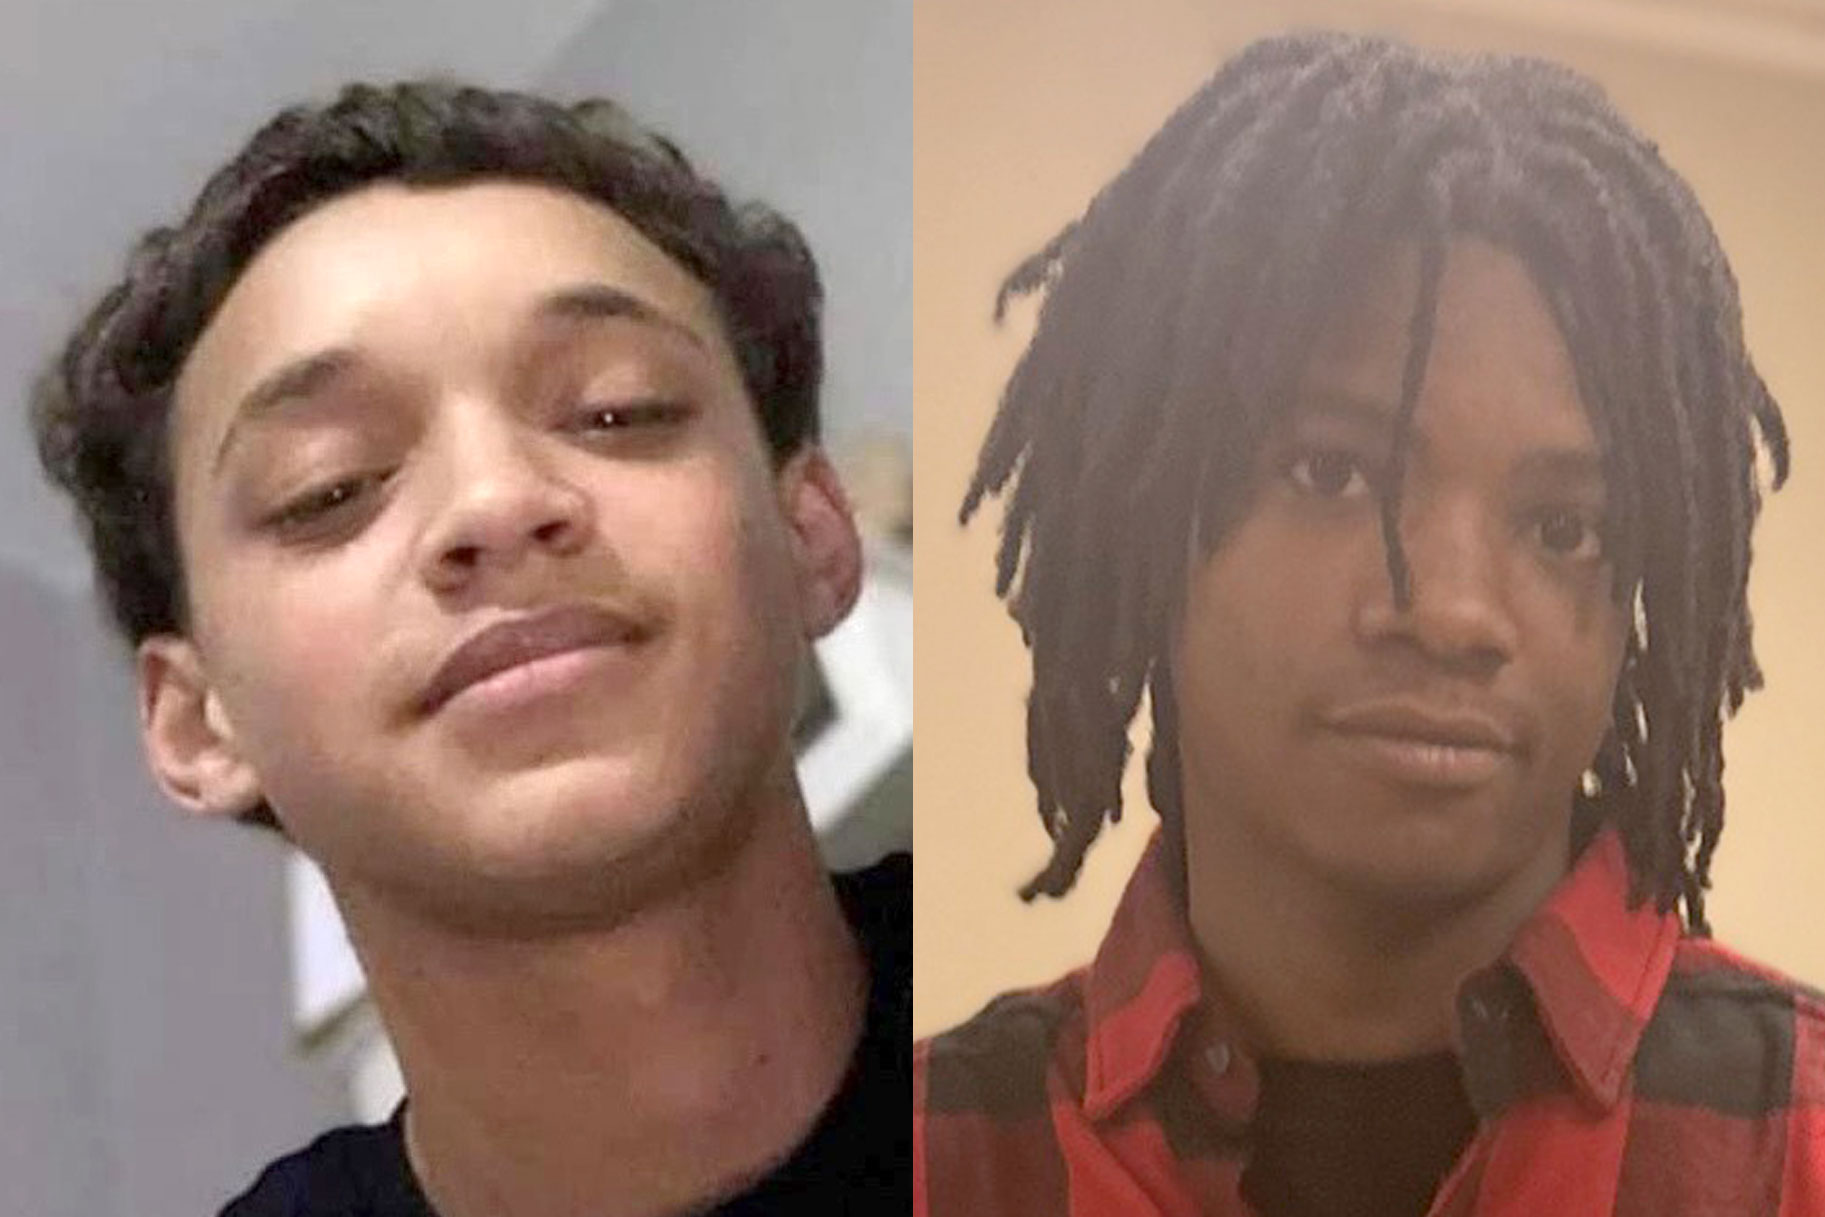 Police handouts of missing youths KeMarion Wilder and Kyshawn Pittman